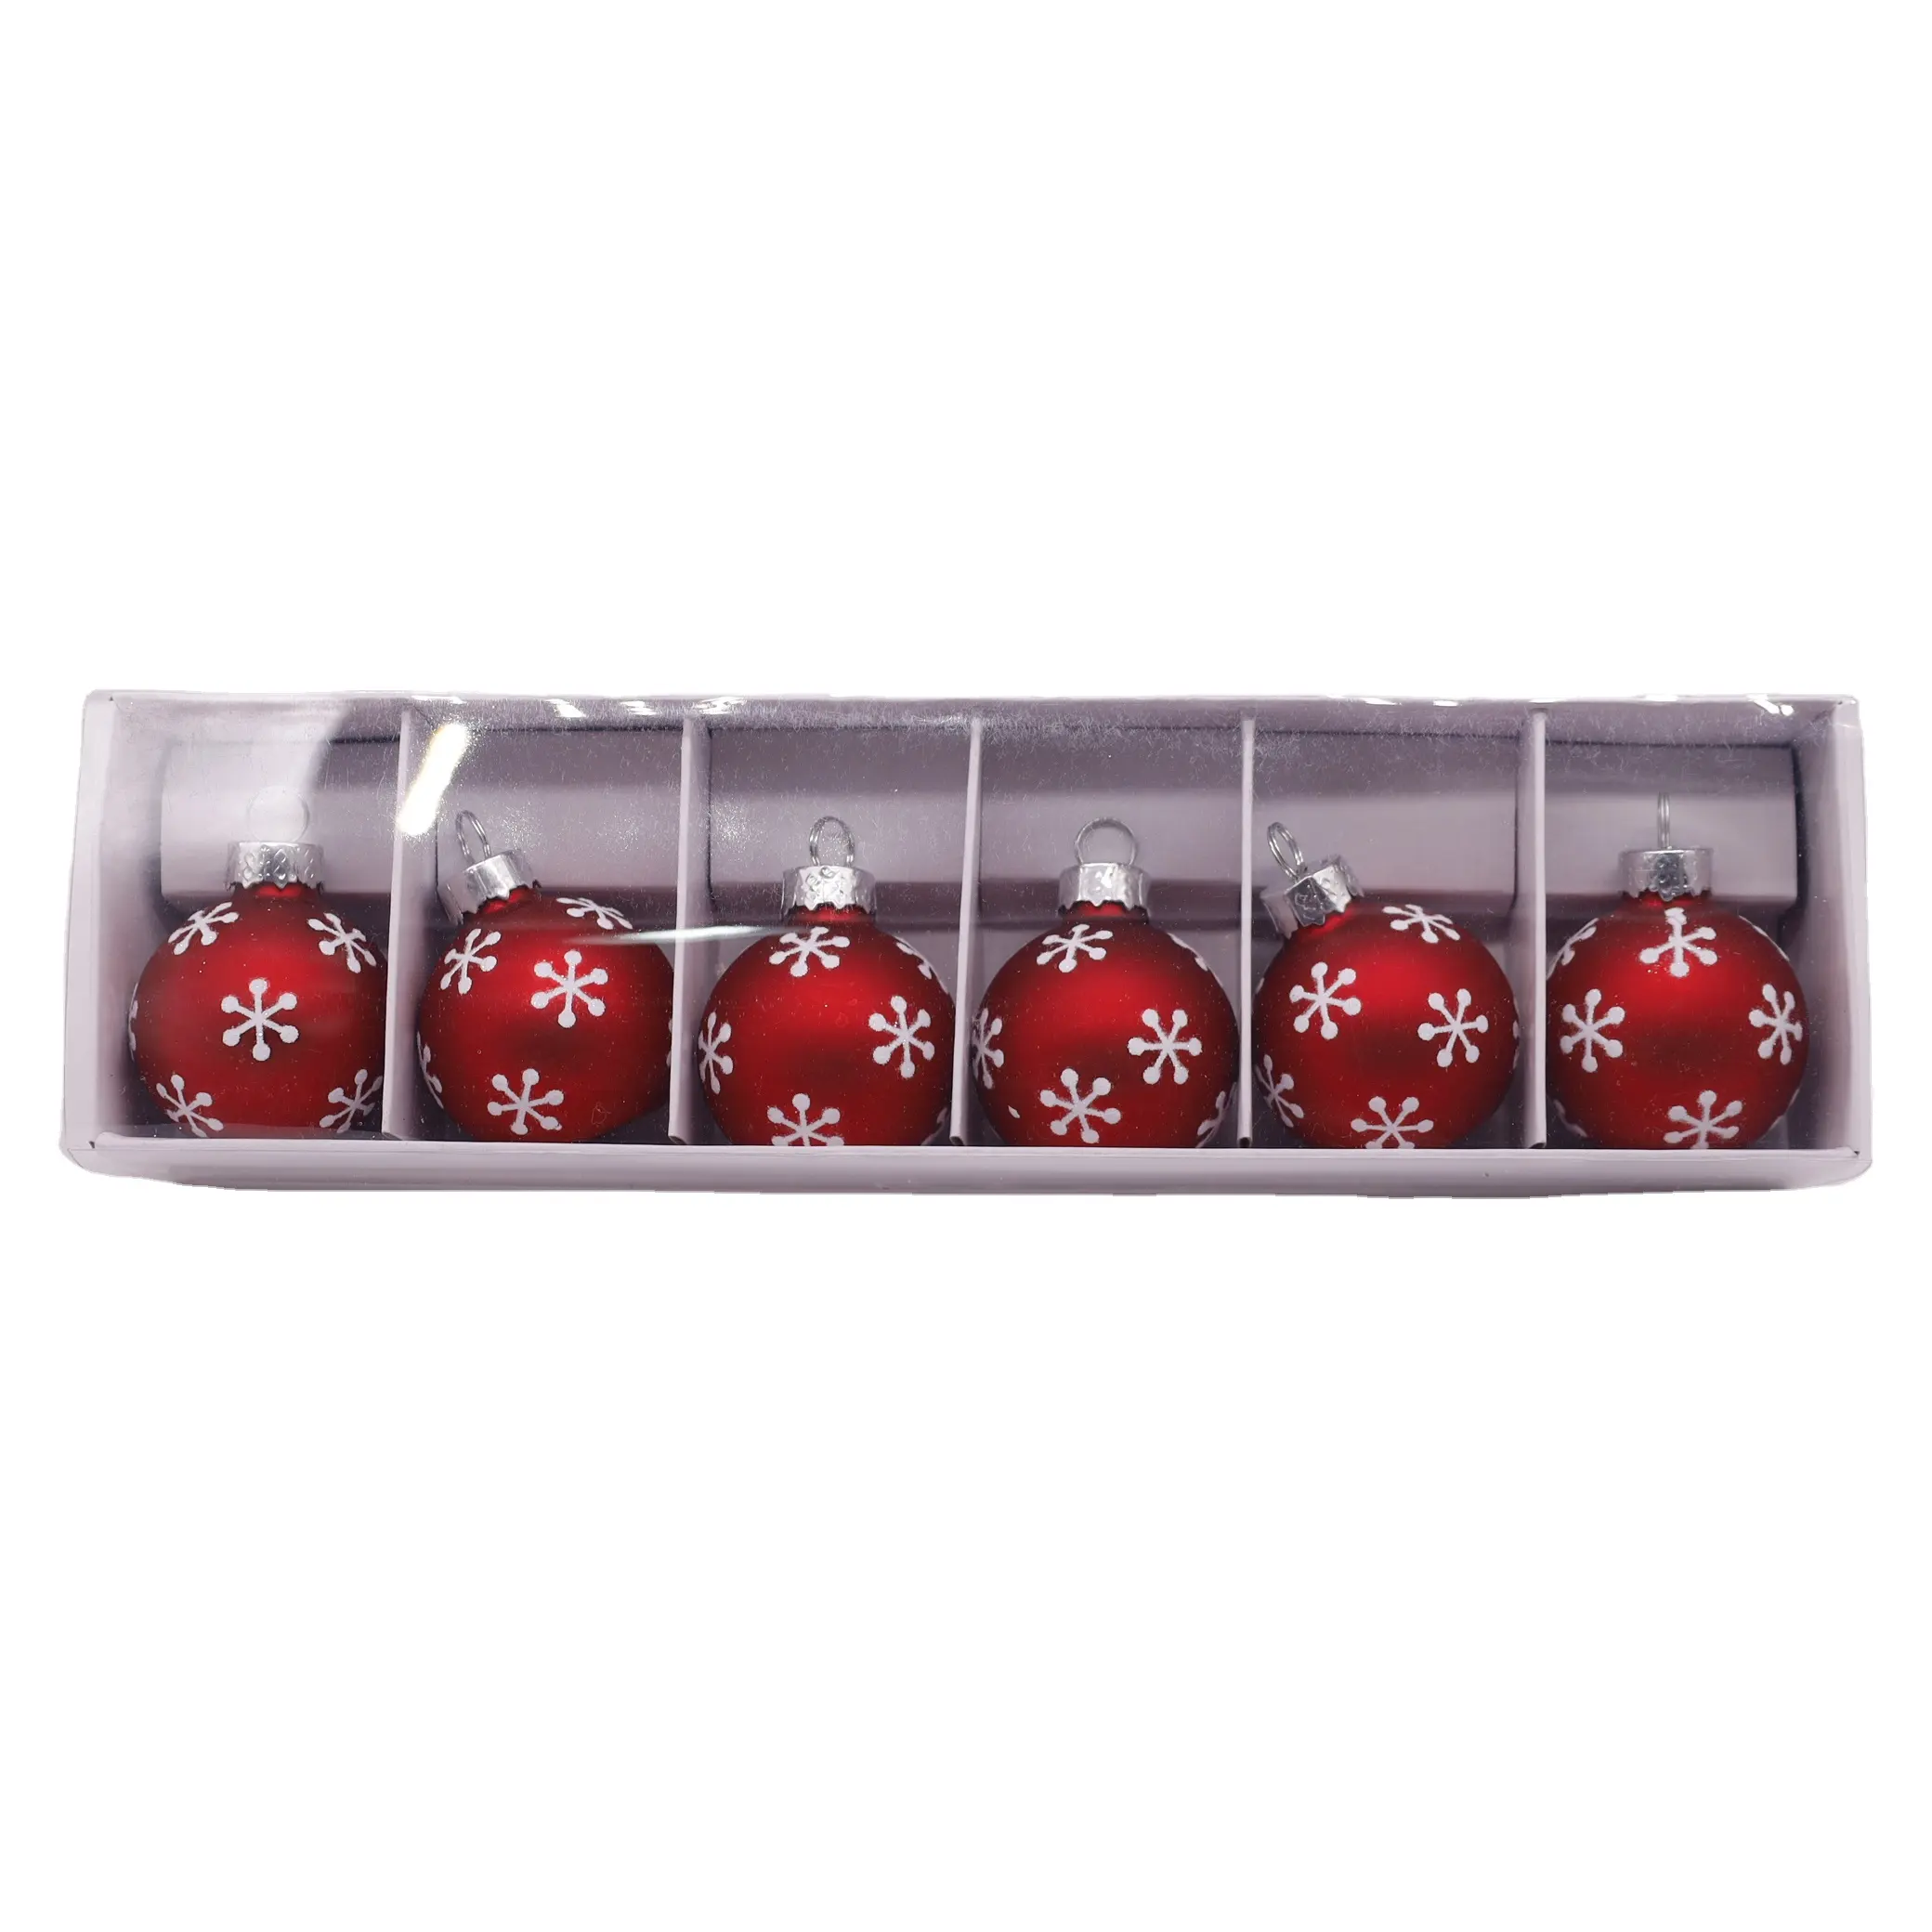 New simple style Wholesale Christmas 3*3*4 cm glass ball set of 6 pcs business card holder or others festival party decorations